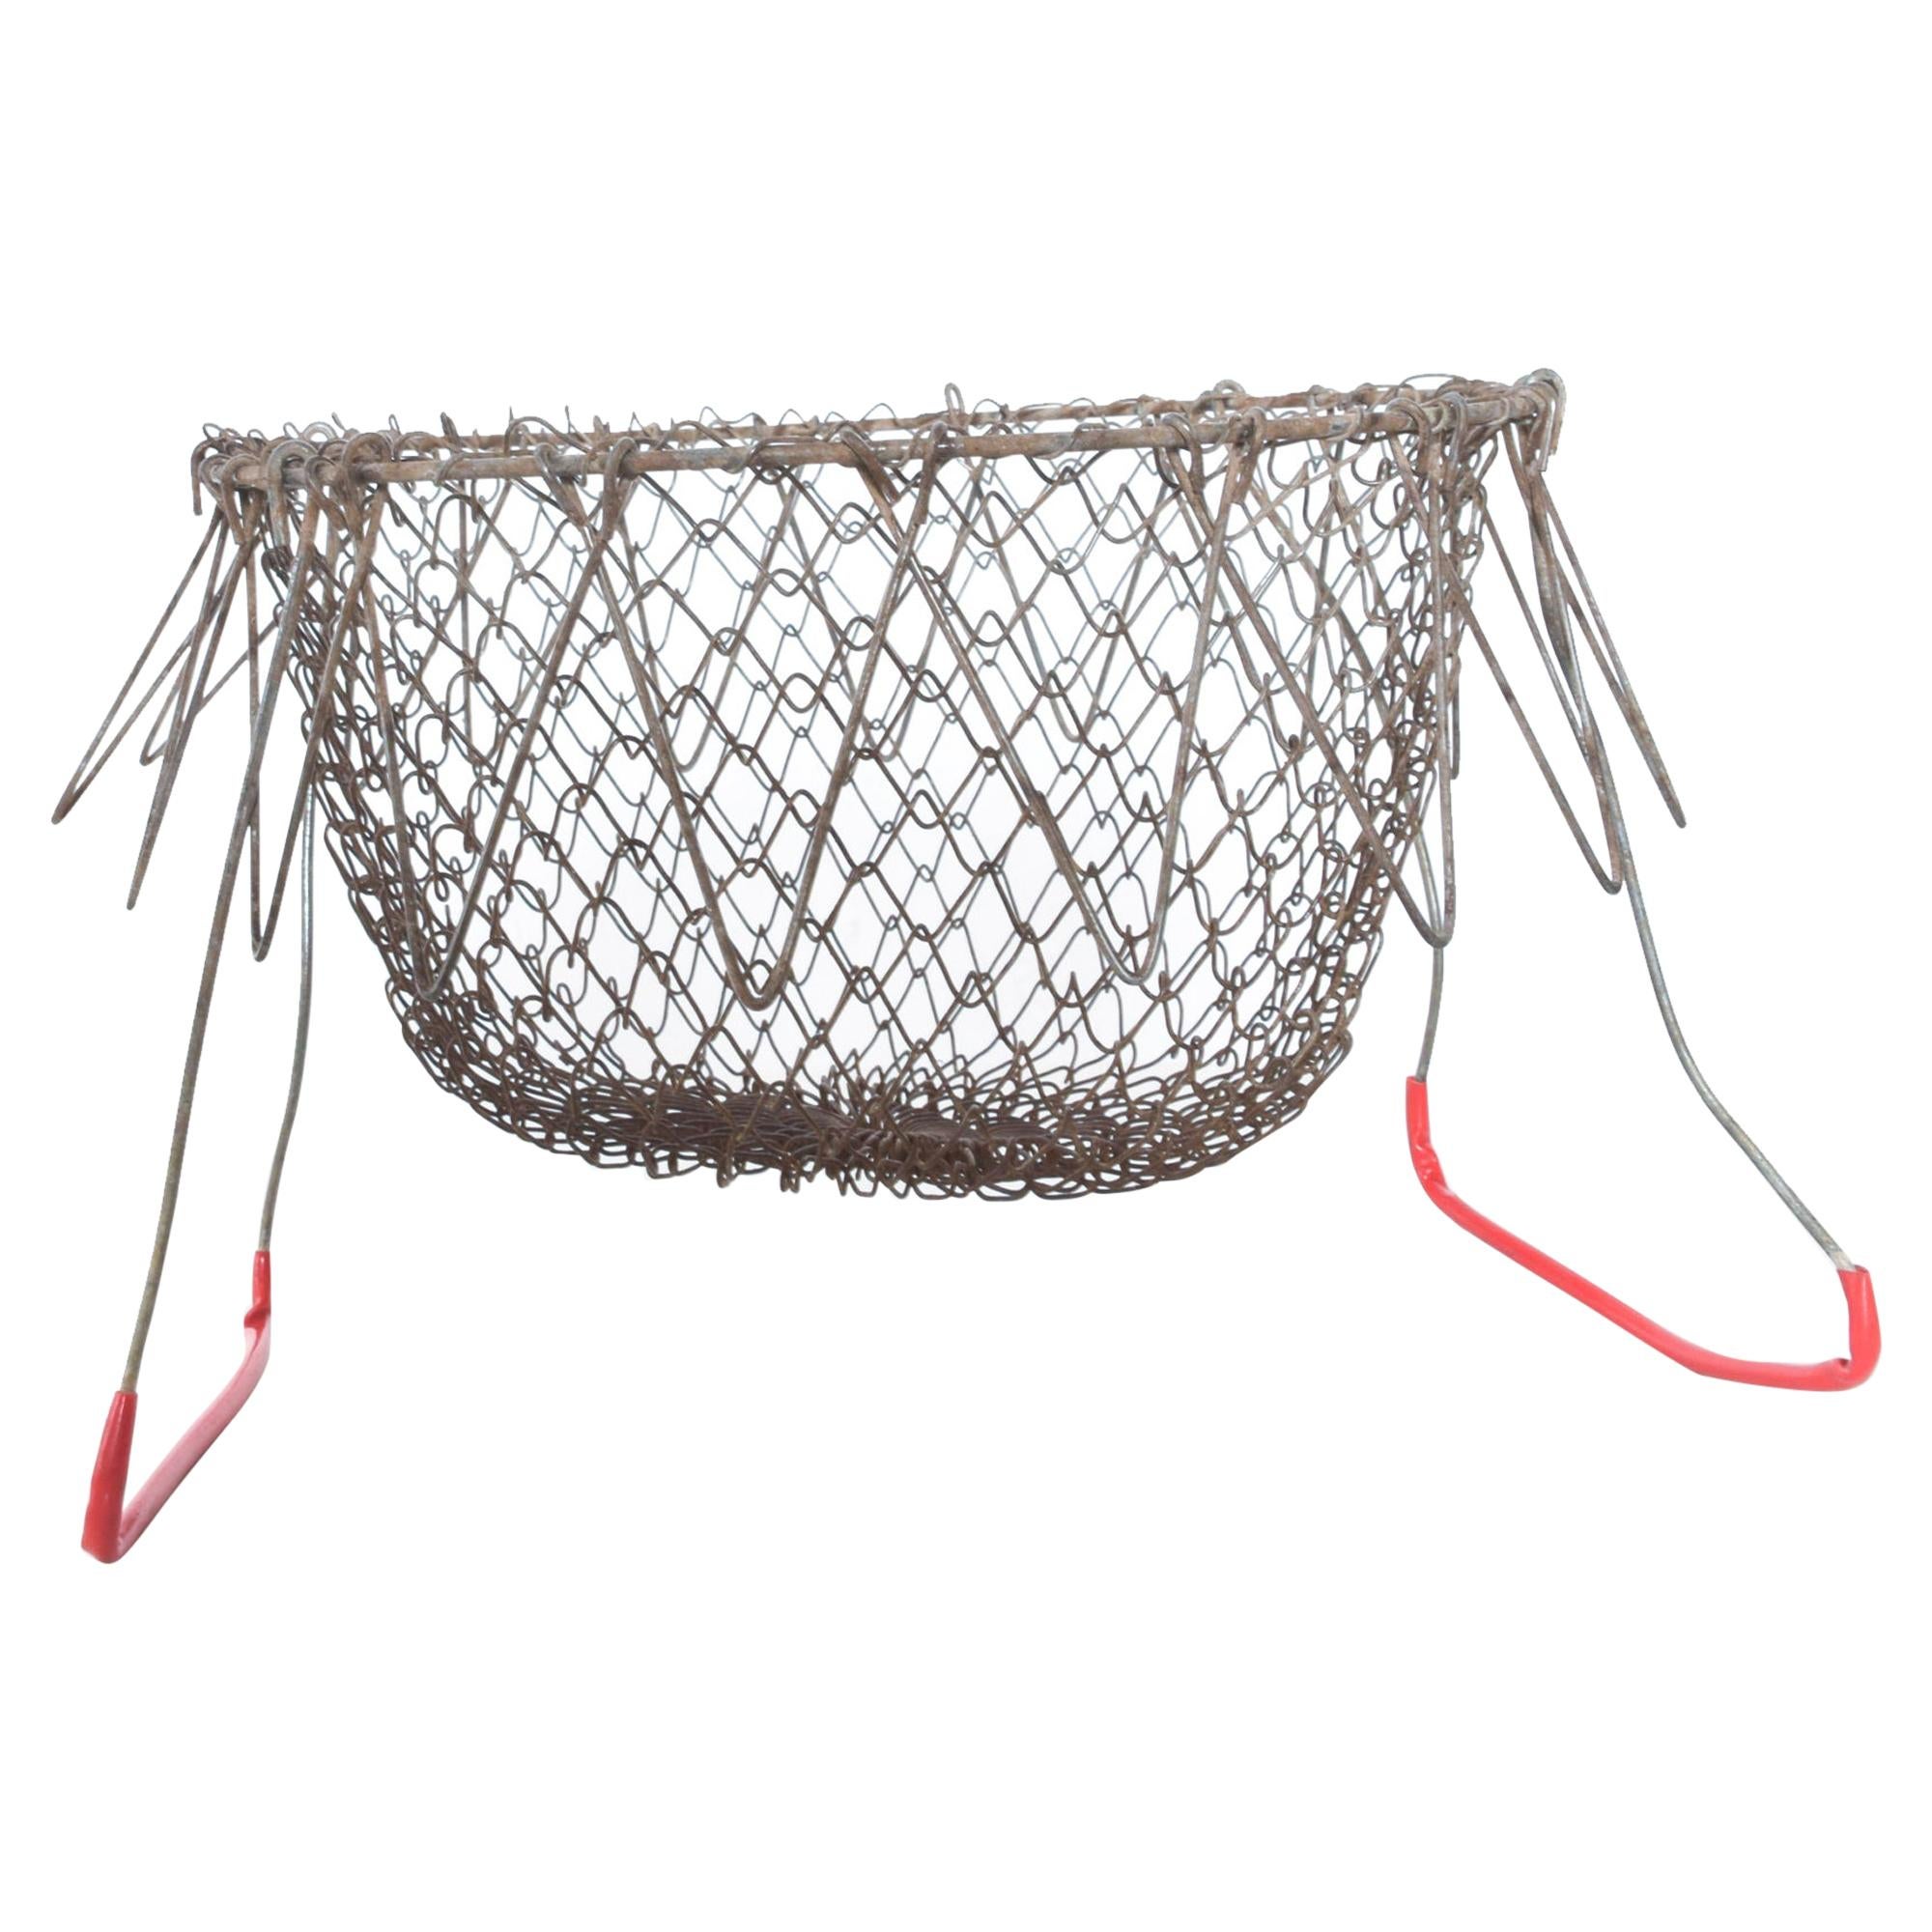 Rustic Farmhouse Chic Red Wire Basket Intricate Mesh Grid